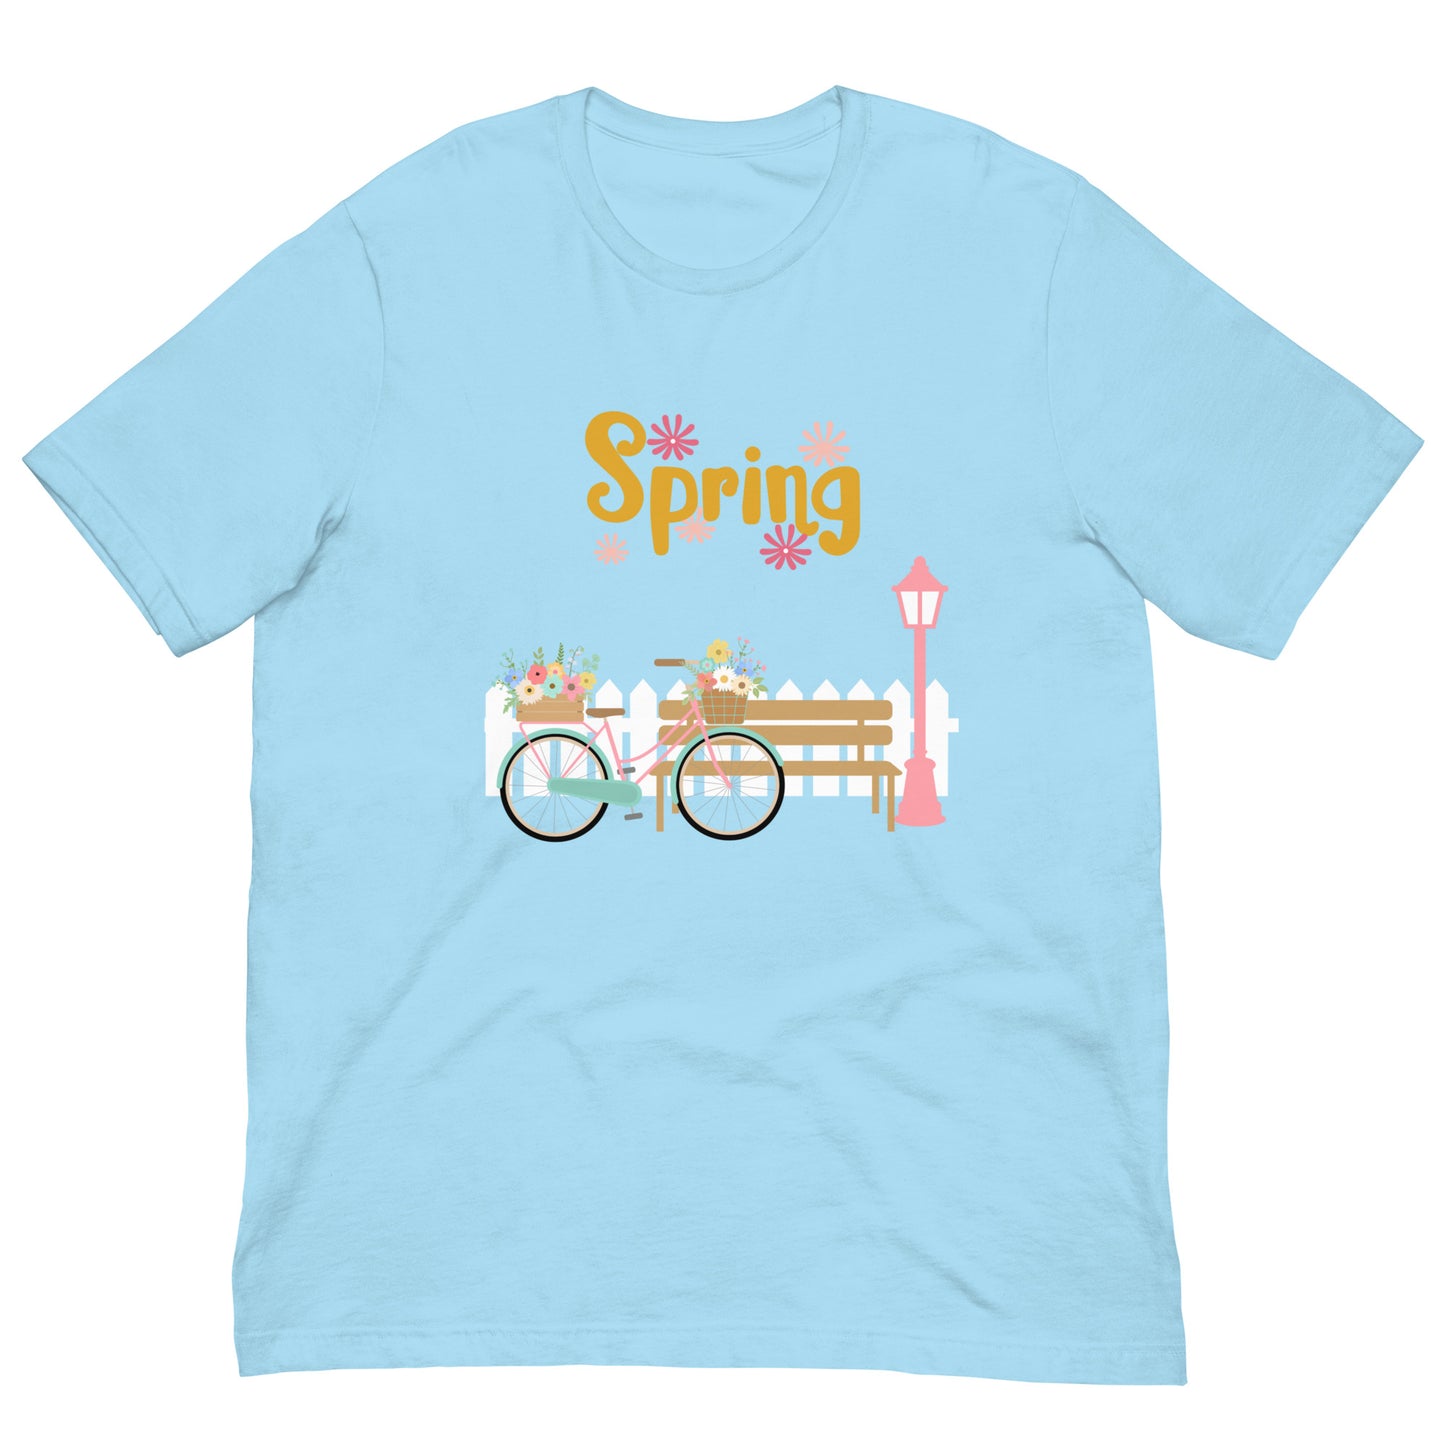 Unisex flower t-shirt, spring t-shirt, t-shirt with graphics, bicycle and flowers t-shirt in sunny spring, vibrant colors